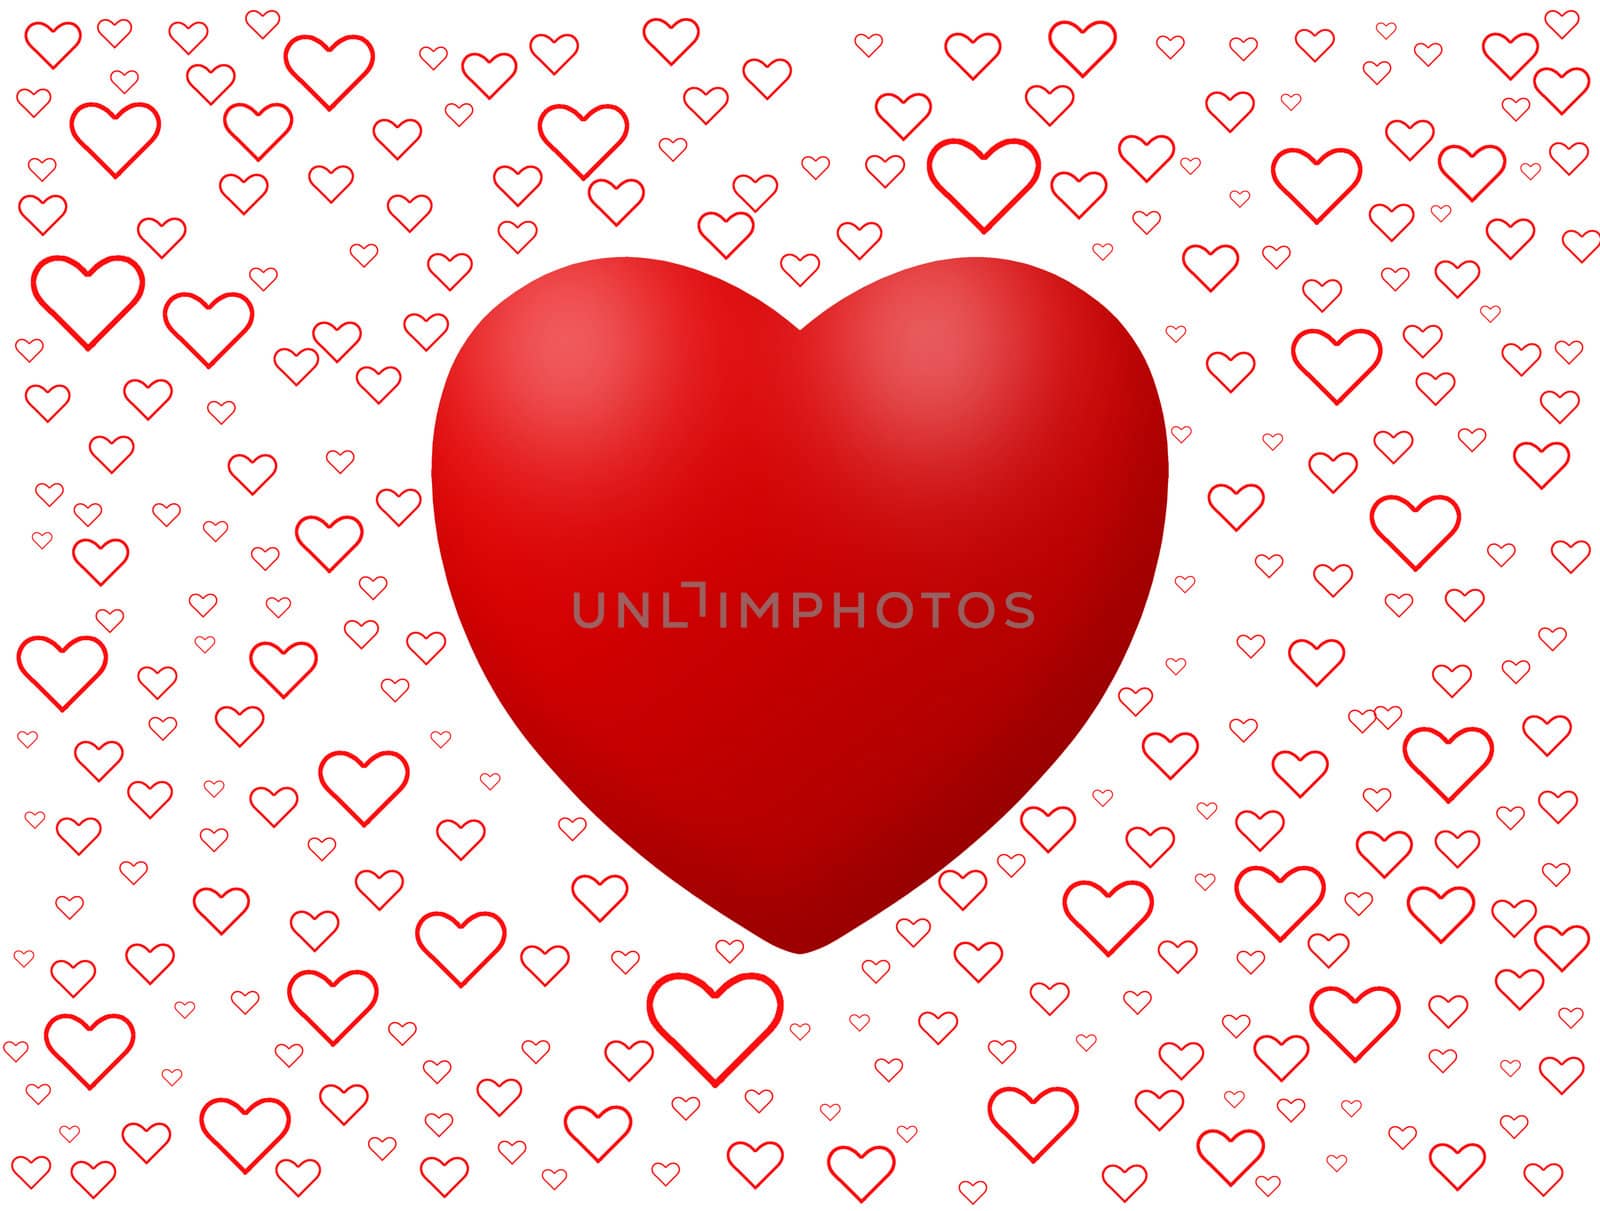 Love background with hearts isolated on white by Sevaljevic